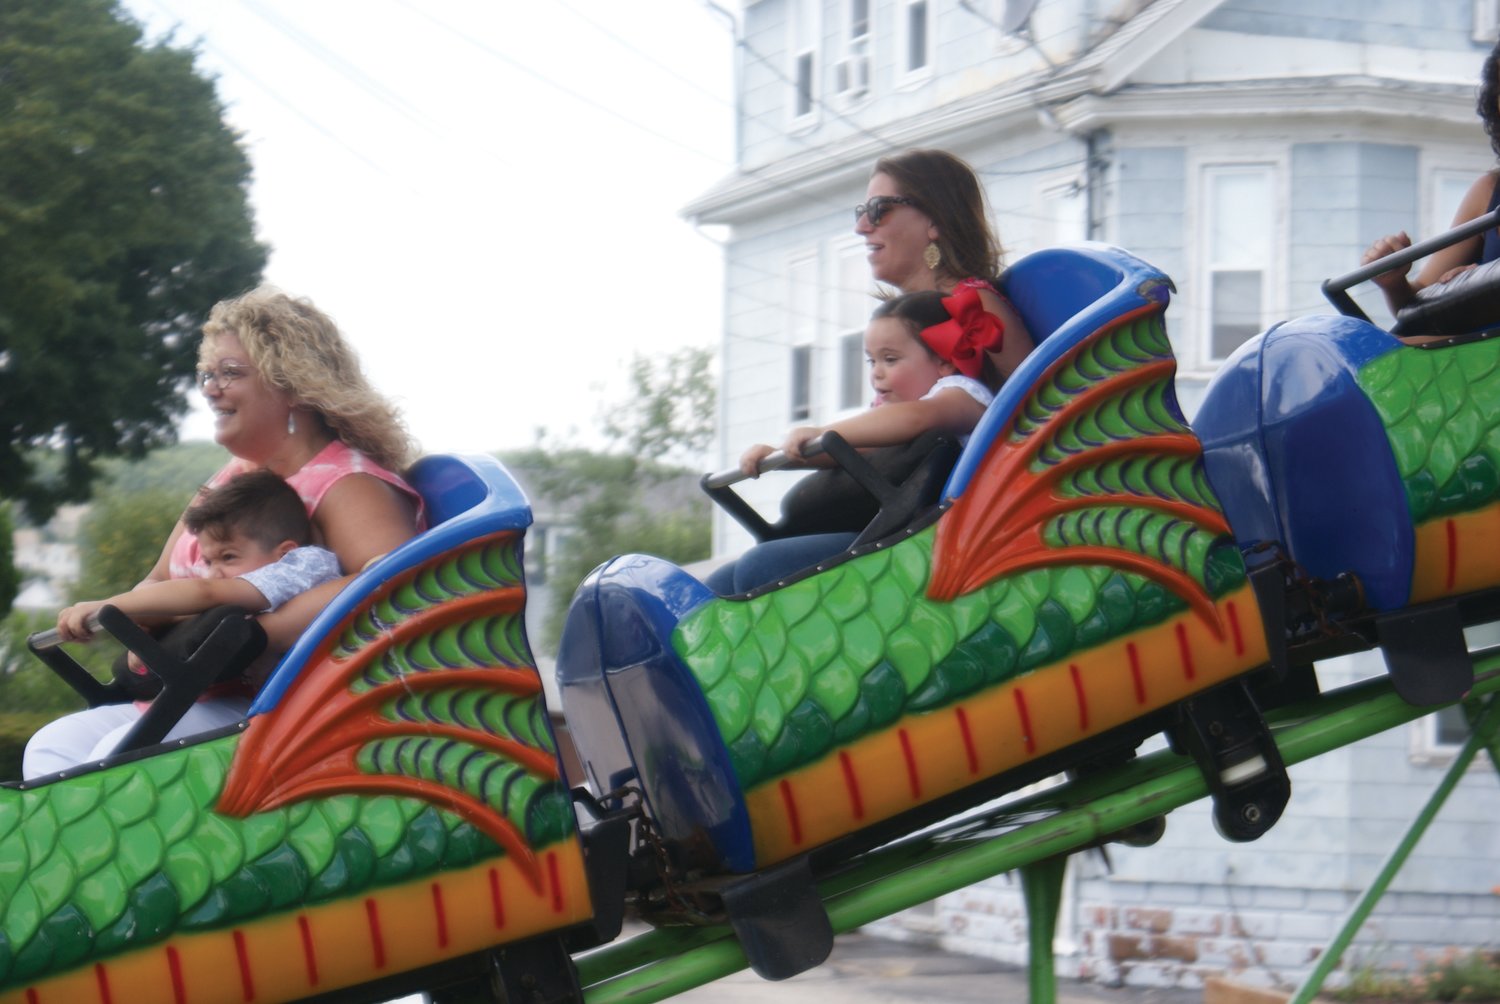 OUT FOR A RIDE: Families enjoy one of the carnival rides at this
year’s feast.